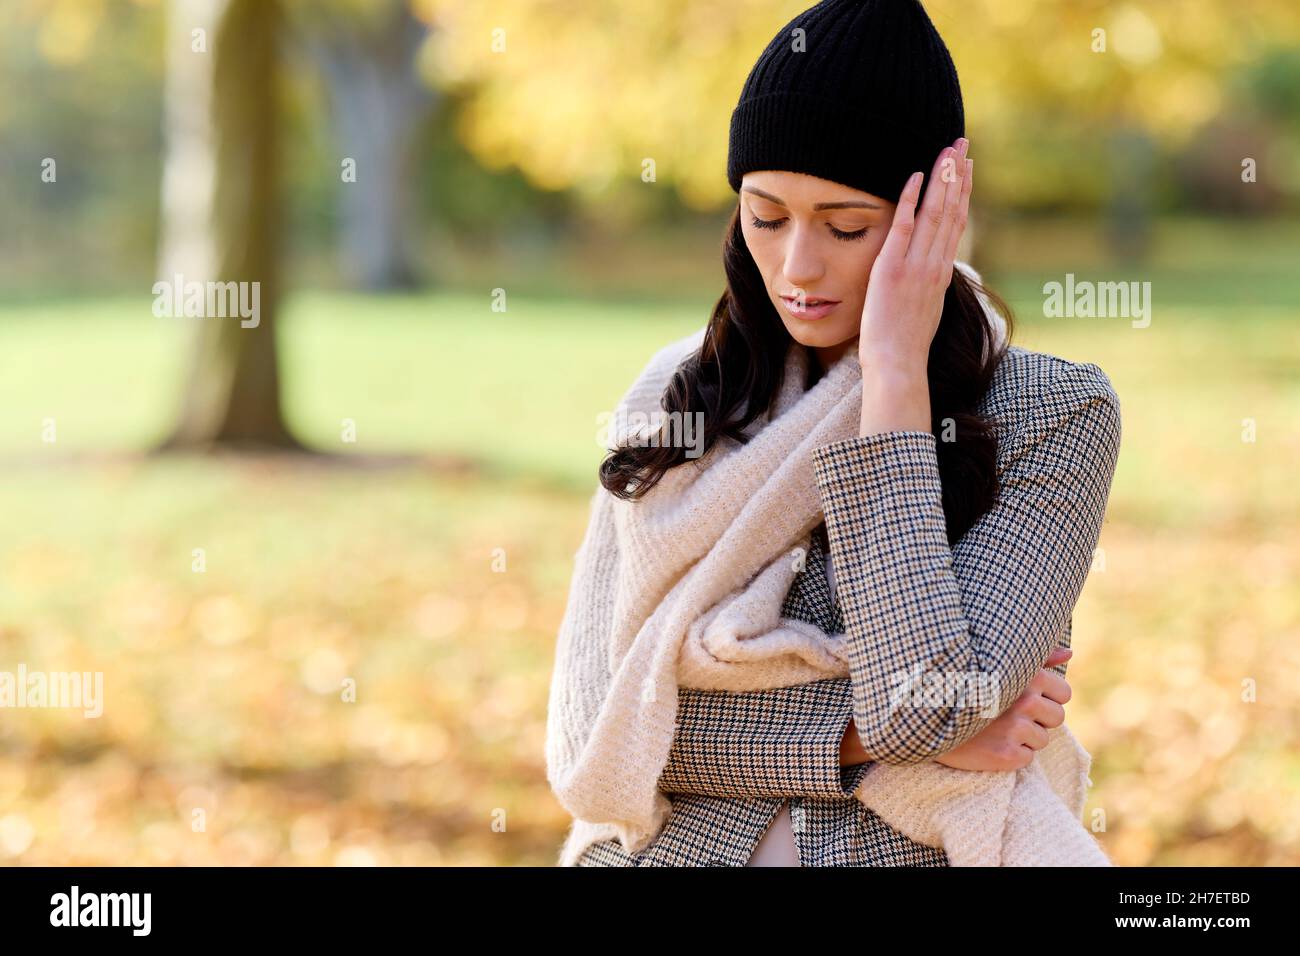 Woman looking concerned outdoors Stock Photo